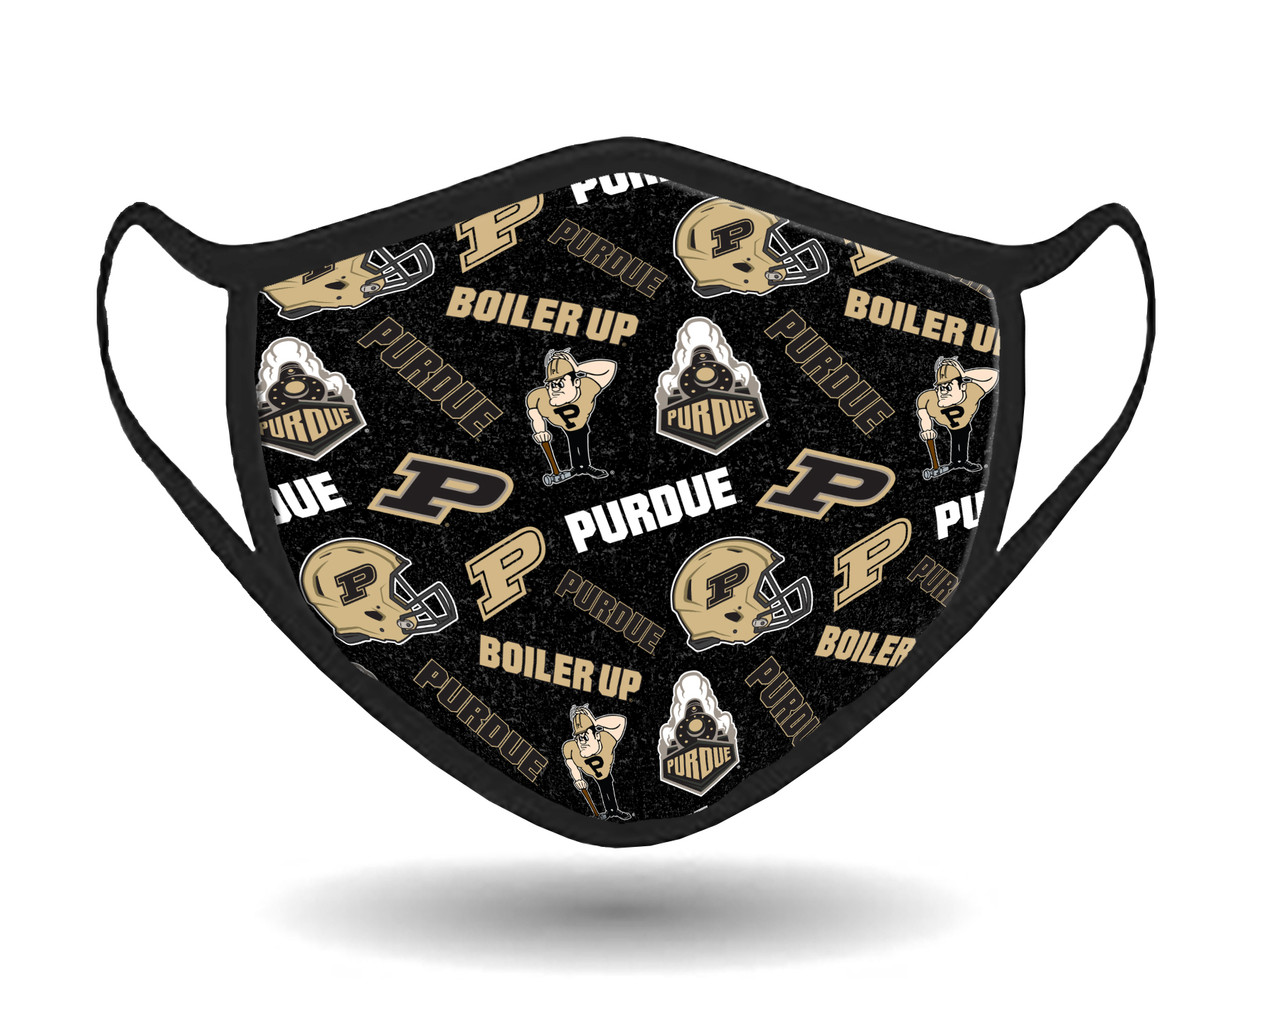 Purdue University Face Mask with Anti-Microbial & Probiotics-100% Cotton-Individually Packaged-Adjustable Earloop